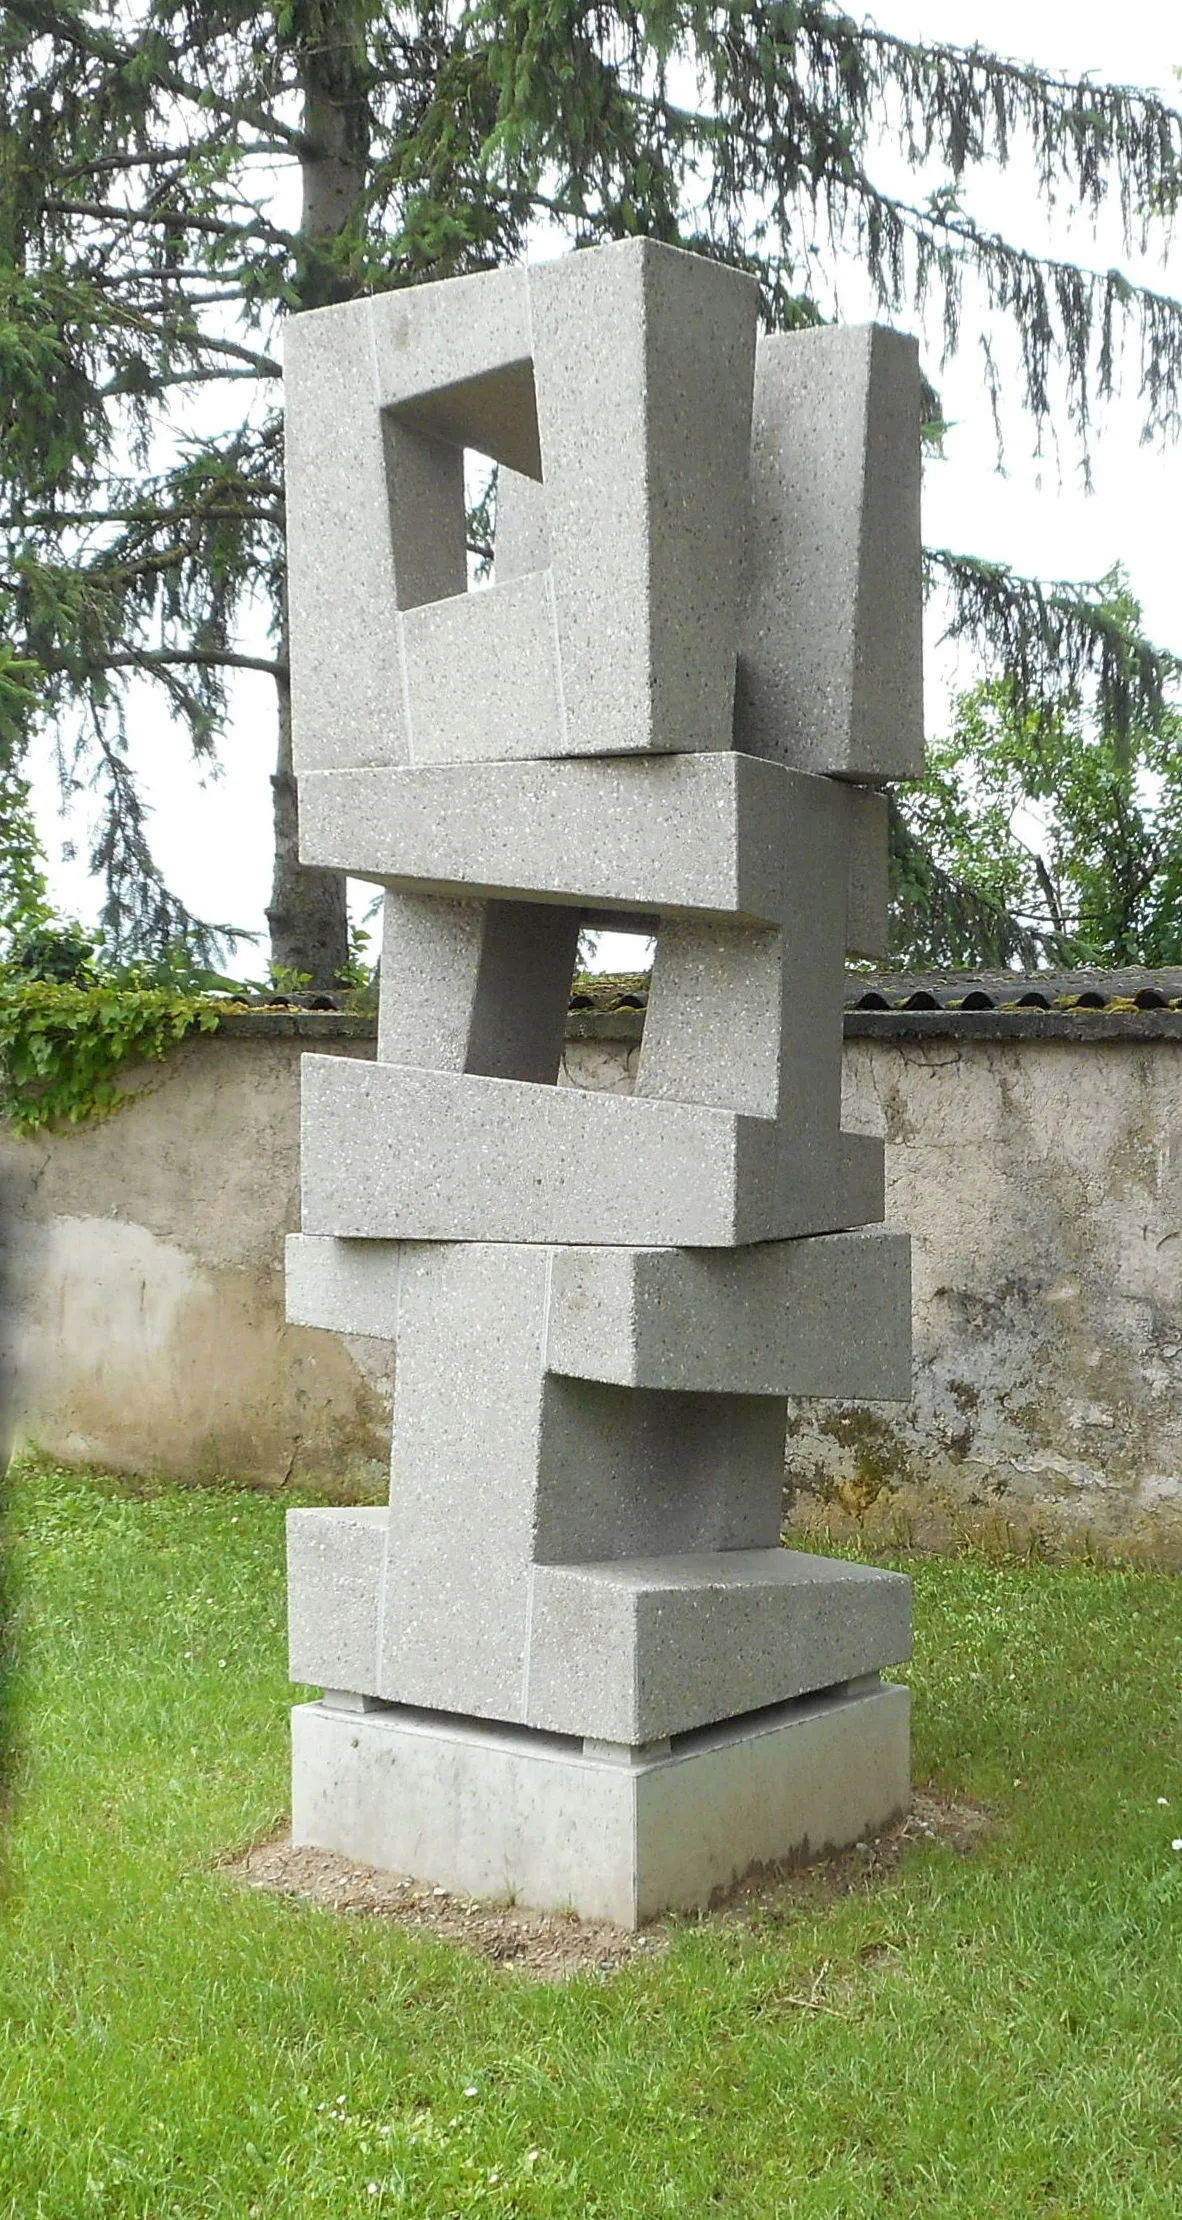 Photo showing: Sculpture by OMI Riesterer, Cube Tower. 300 x 70 x 70 cm. Concrete. 2016. Installed in Grezhausen (Breisach), Germany.